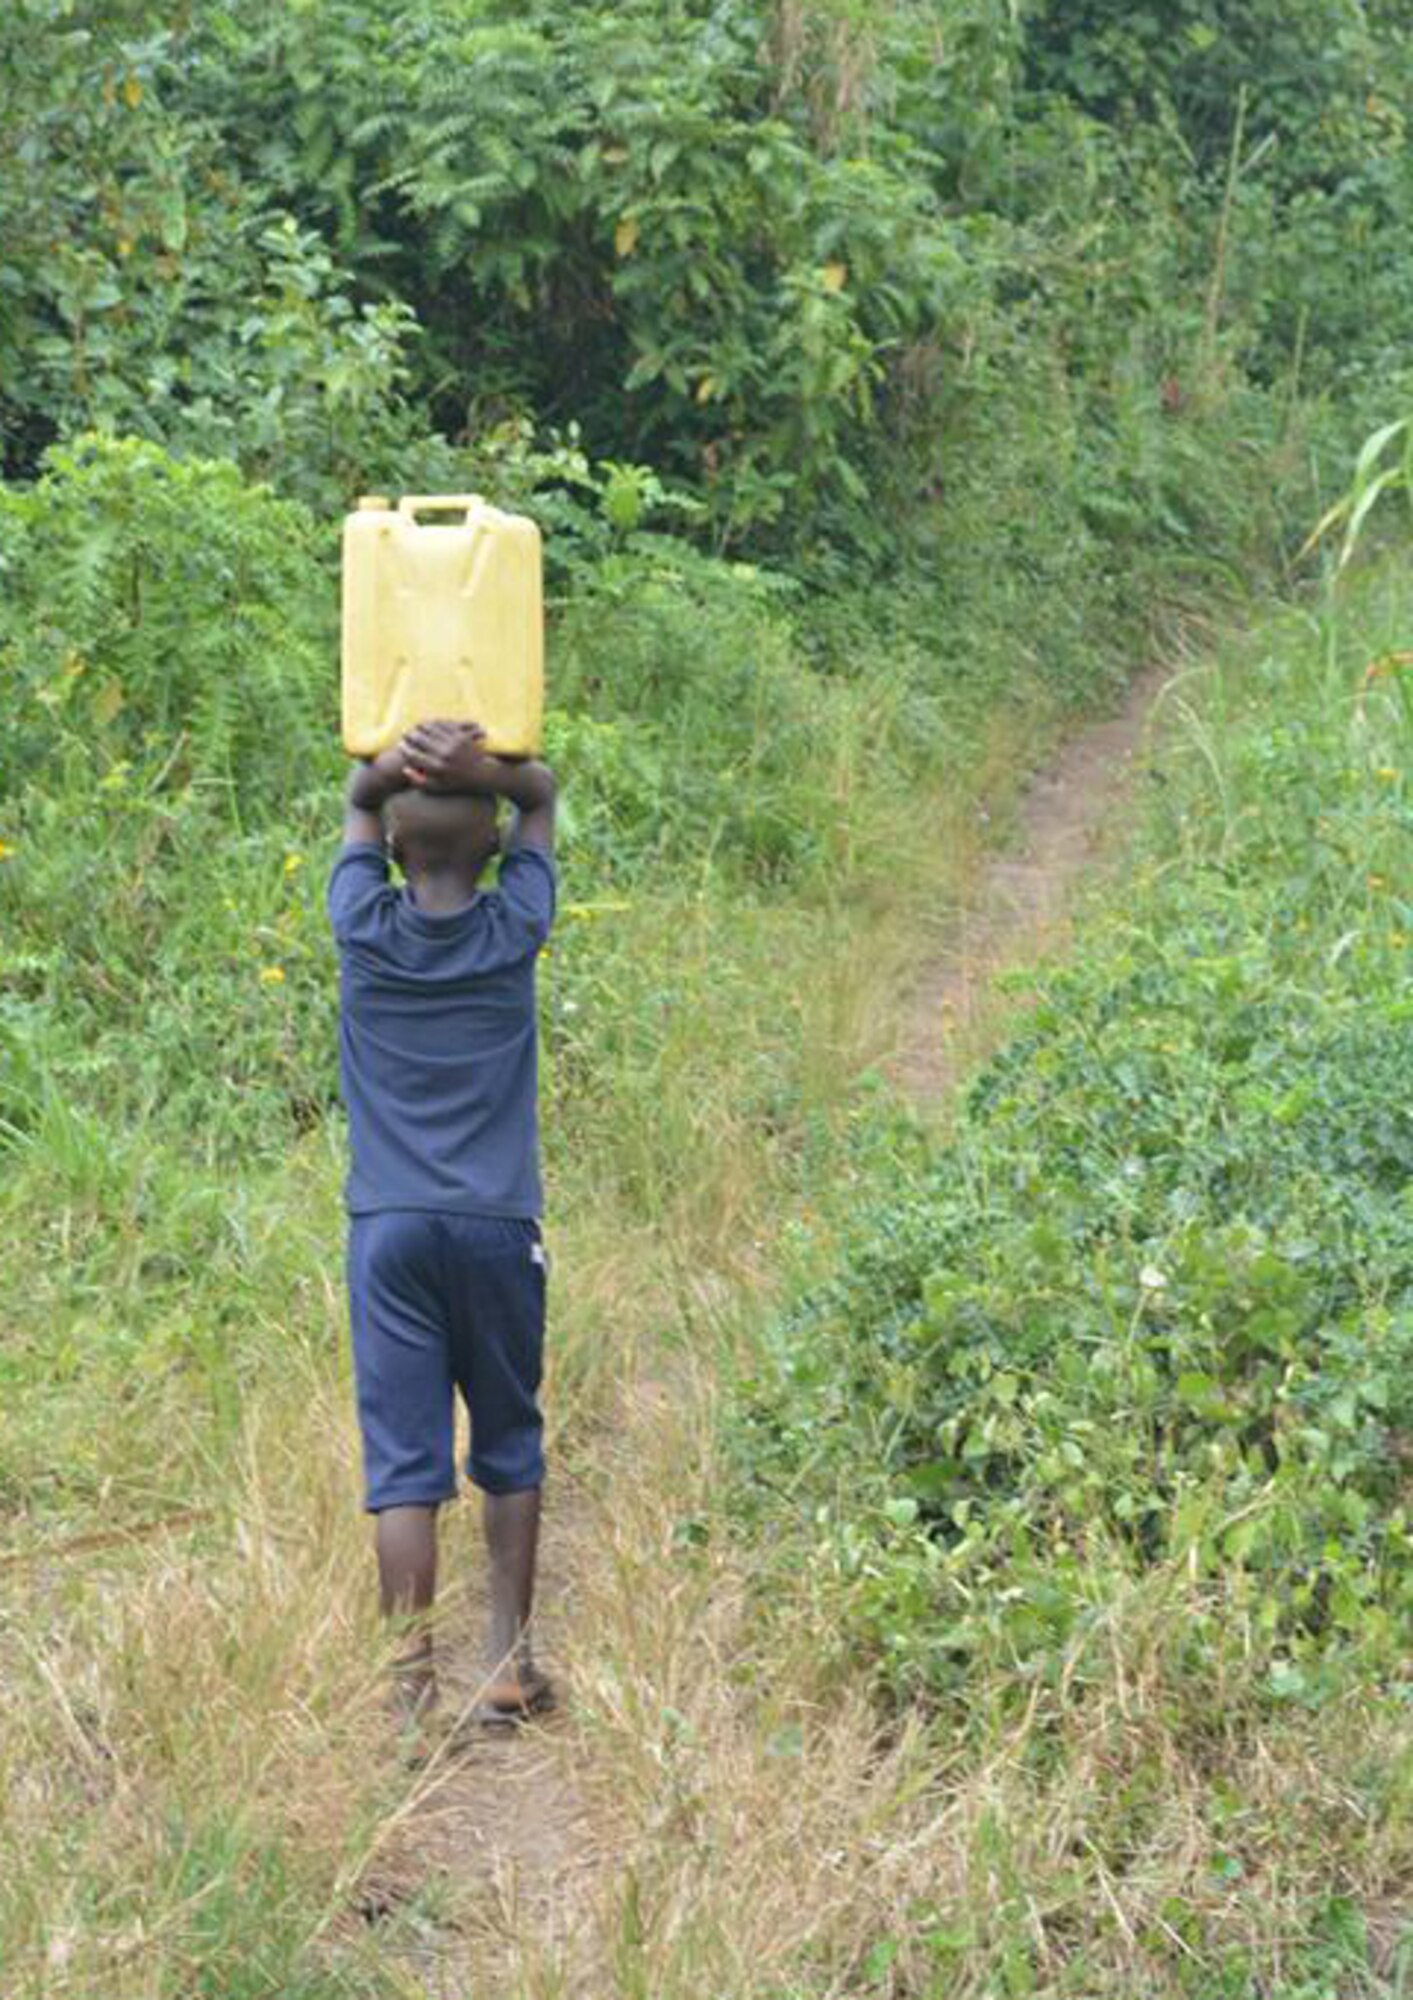 A young boy carries water from a pond to his village. The water contains bacteria that causes illness in villagers. (Courtesy photo)